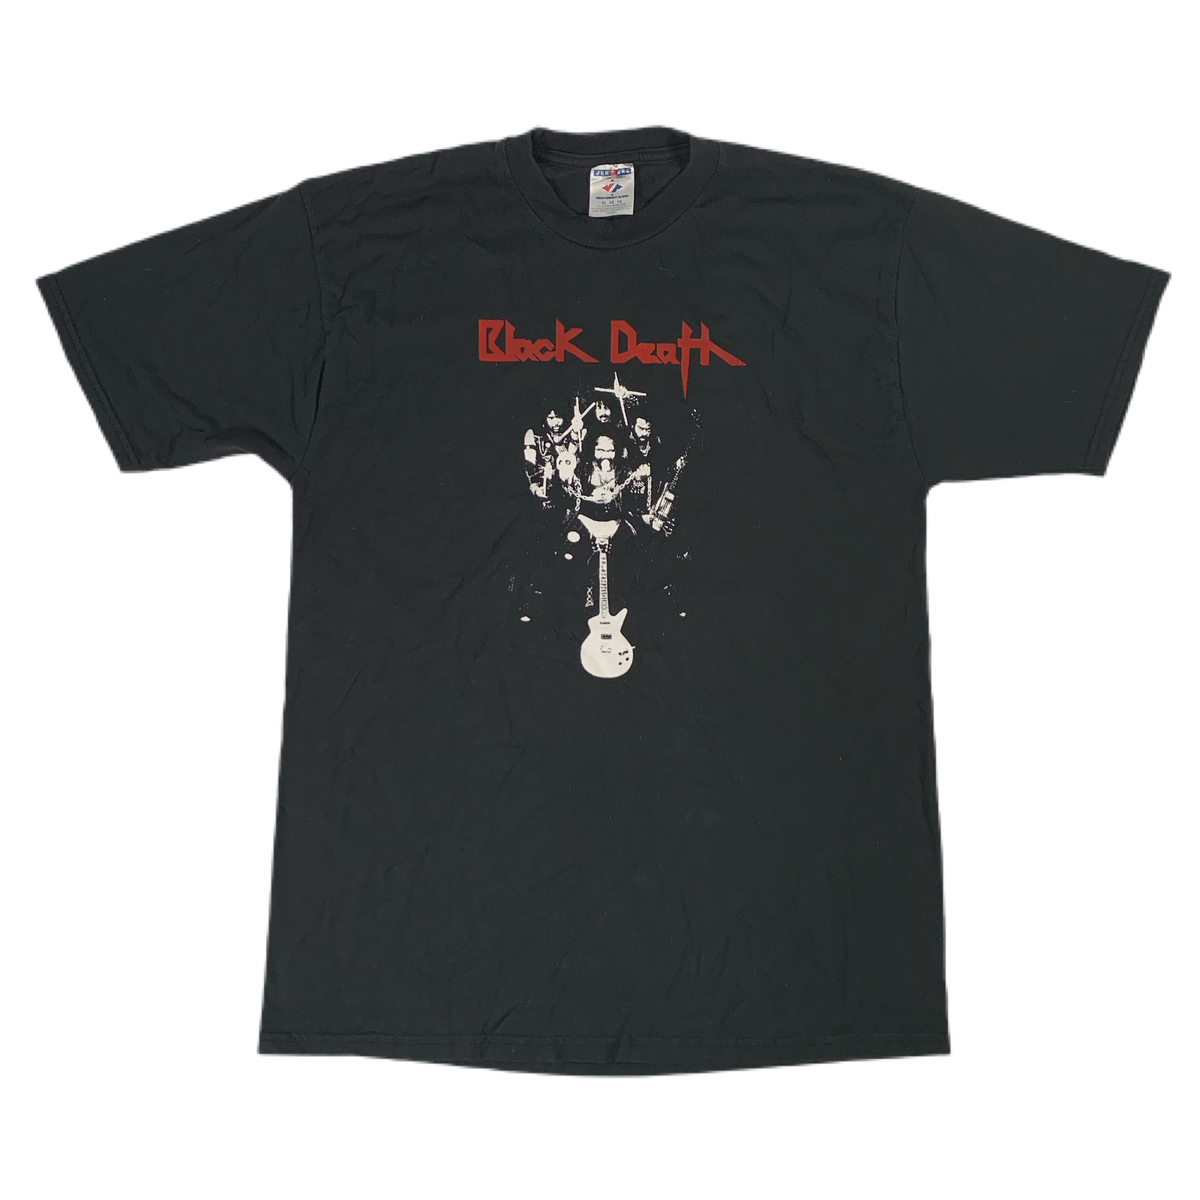 Vintage Black Death “Breaking The Chains” T-Shirt - jointcustodydc